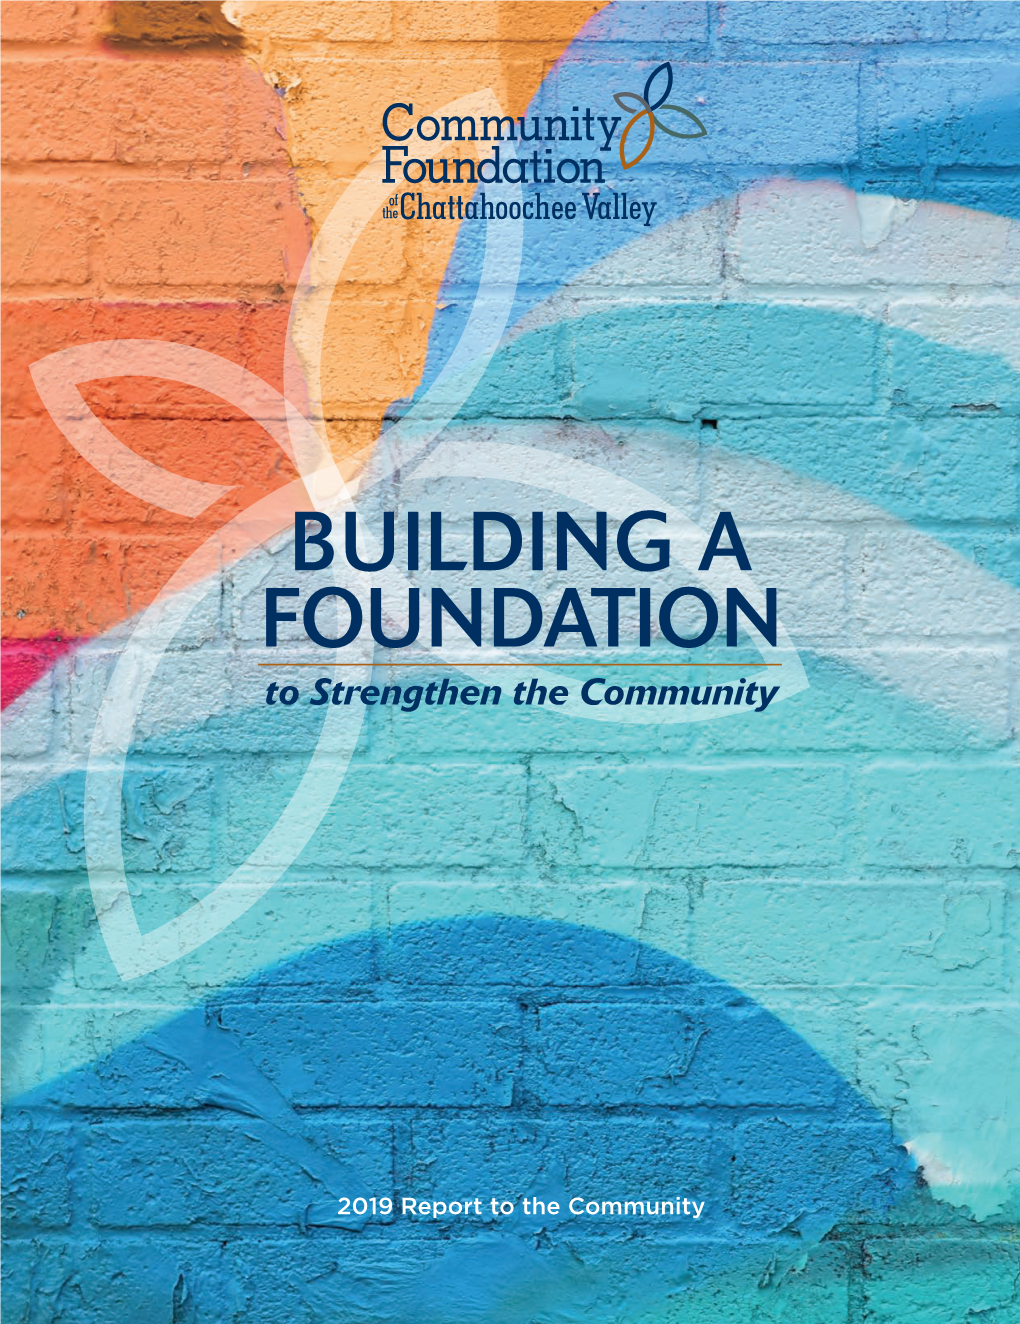 BUILDING a FOUNDATION to Strengthen the Community